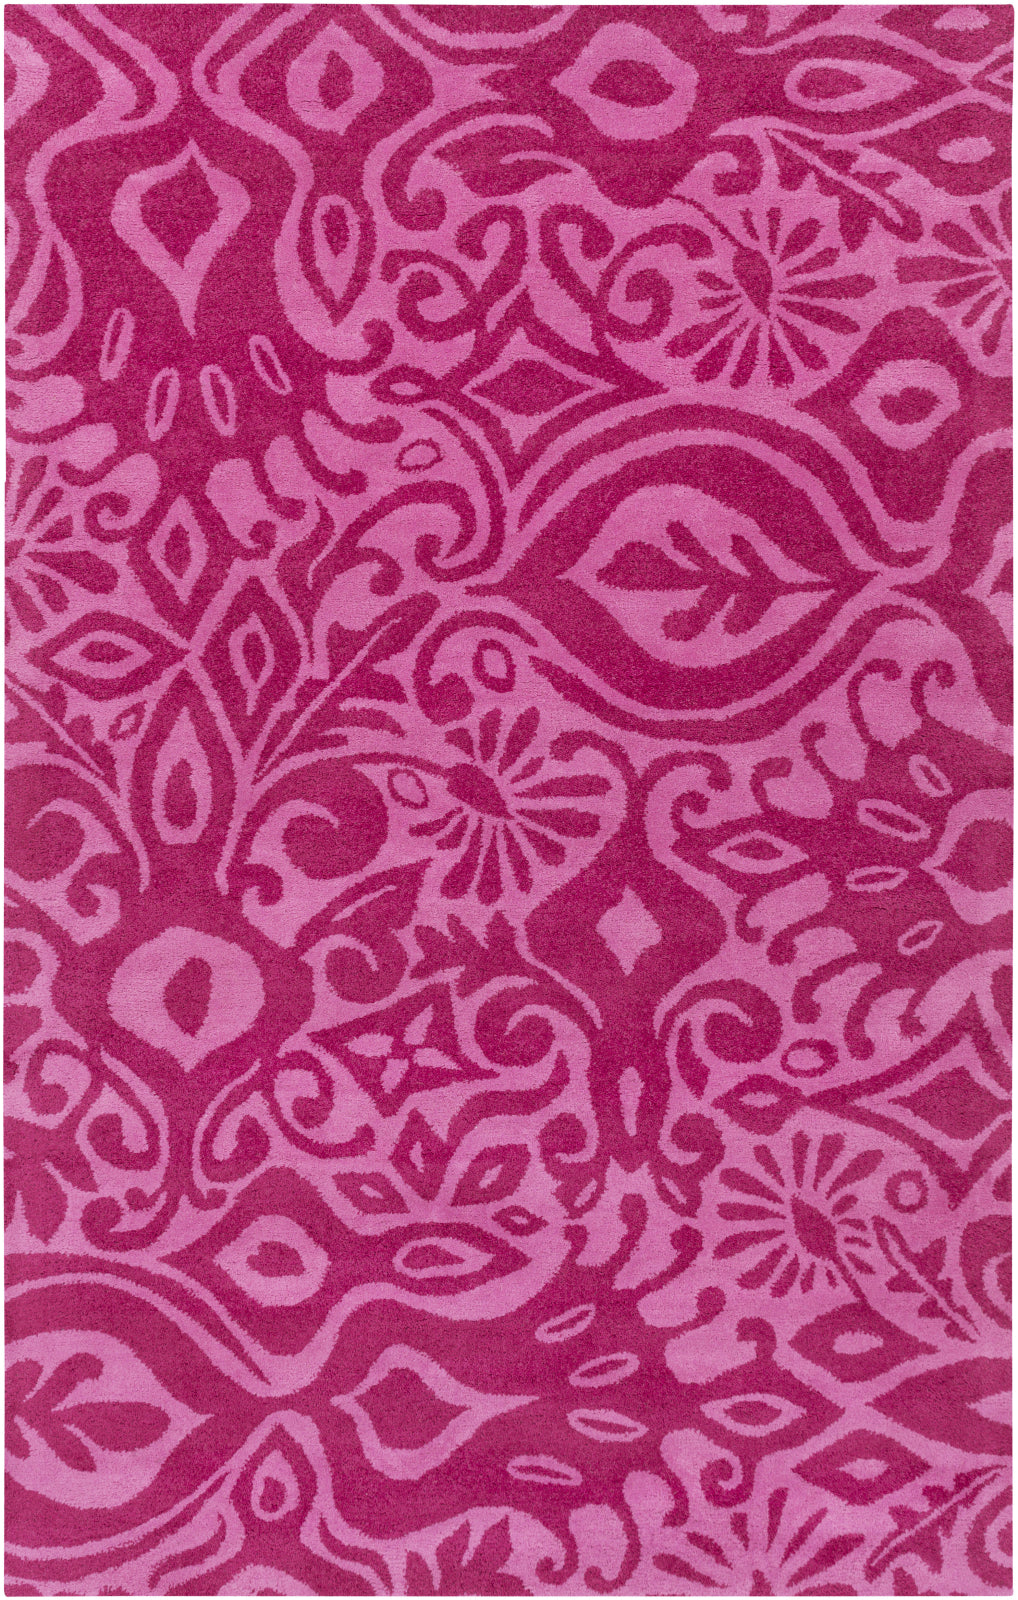 Surya Alhambra ALH-5021 Area Rug by Kate Spain main image